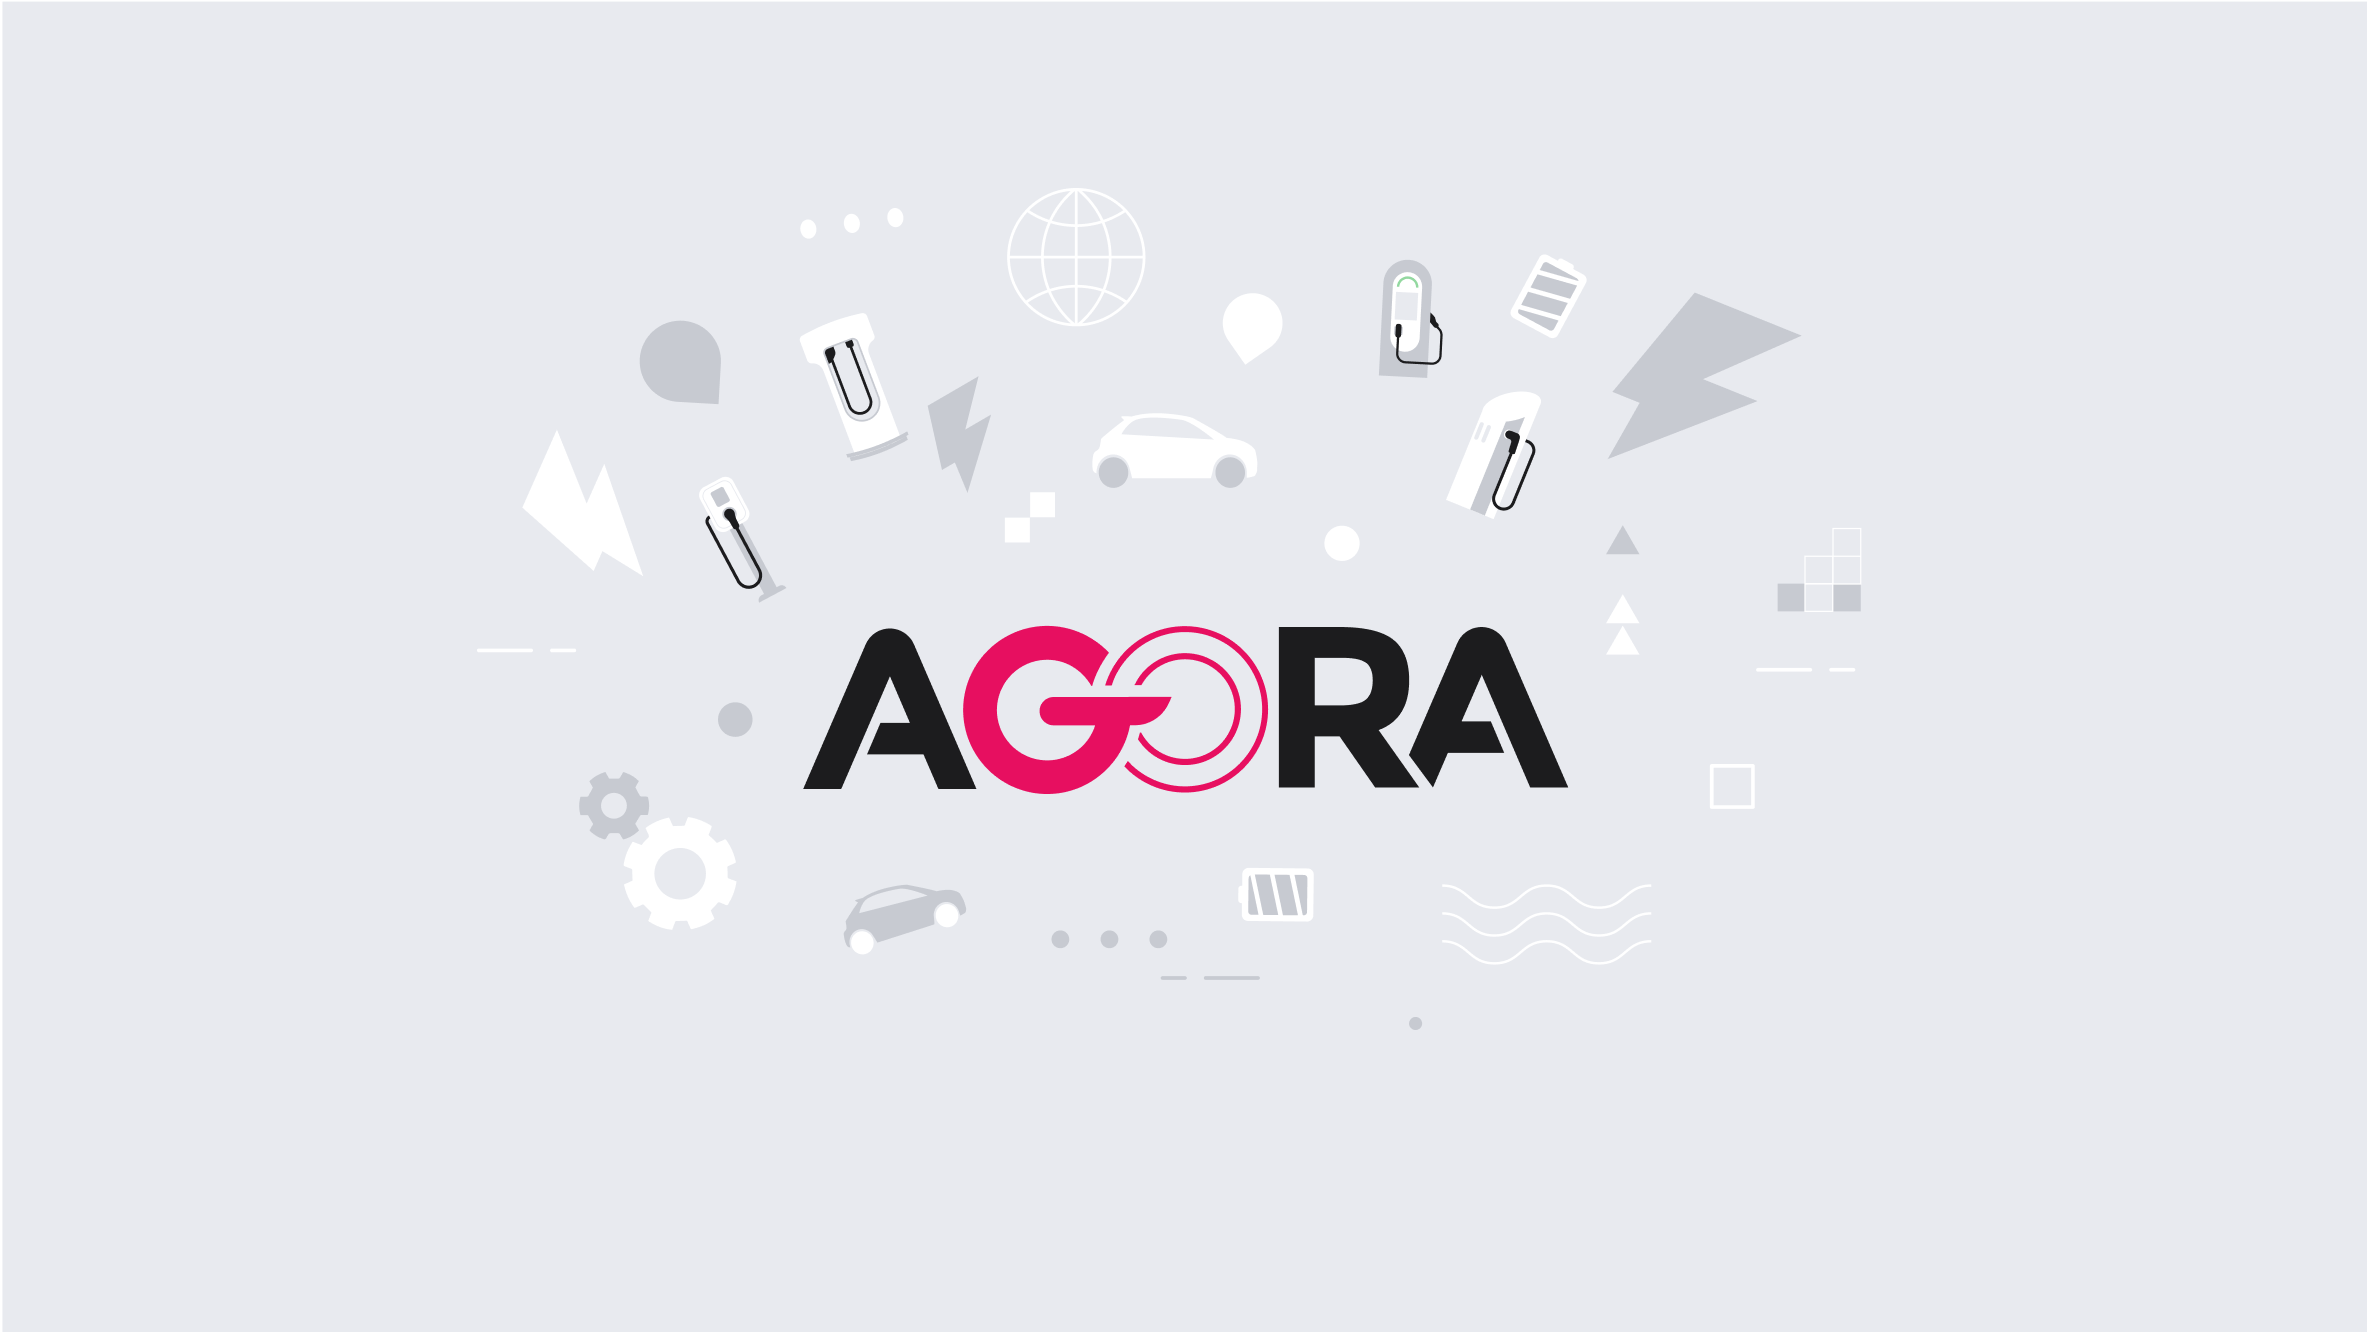 Why does the transport electrification sector need Agora?